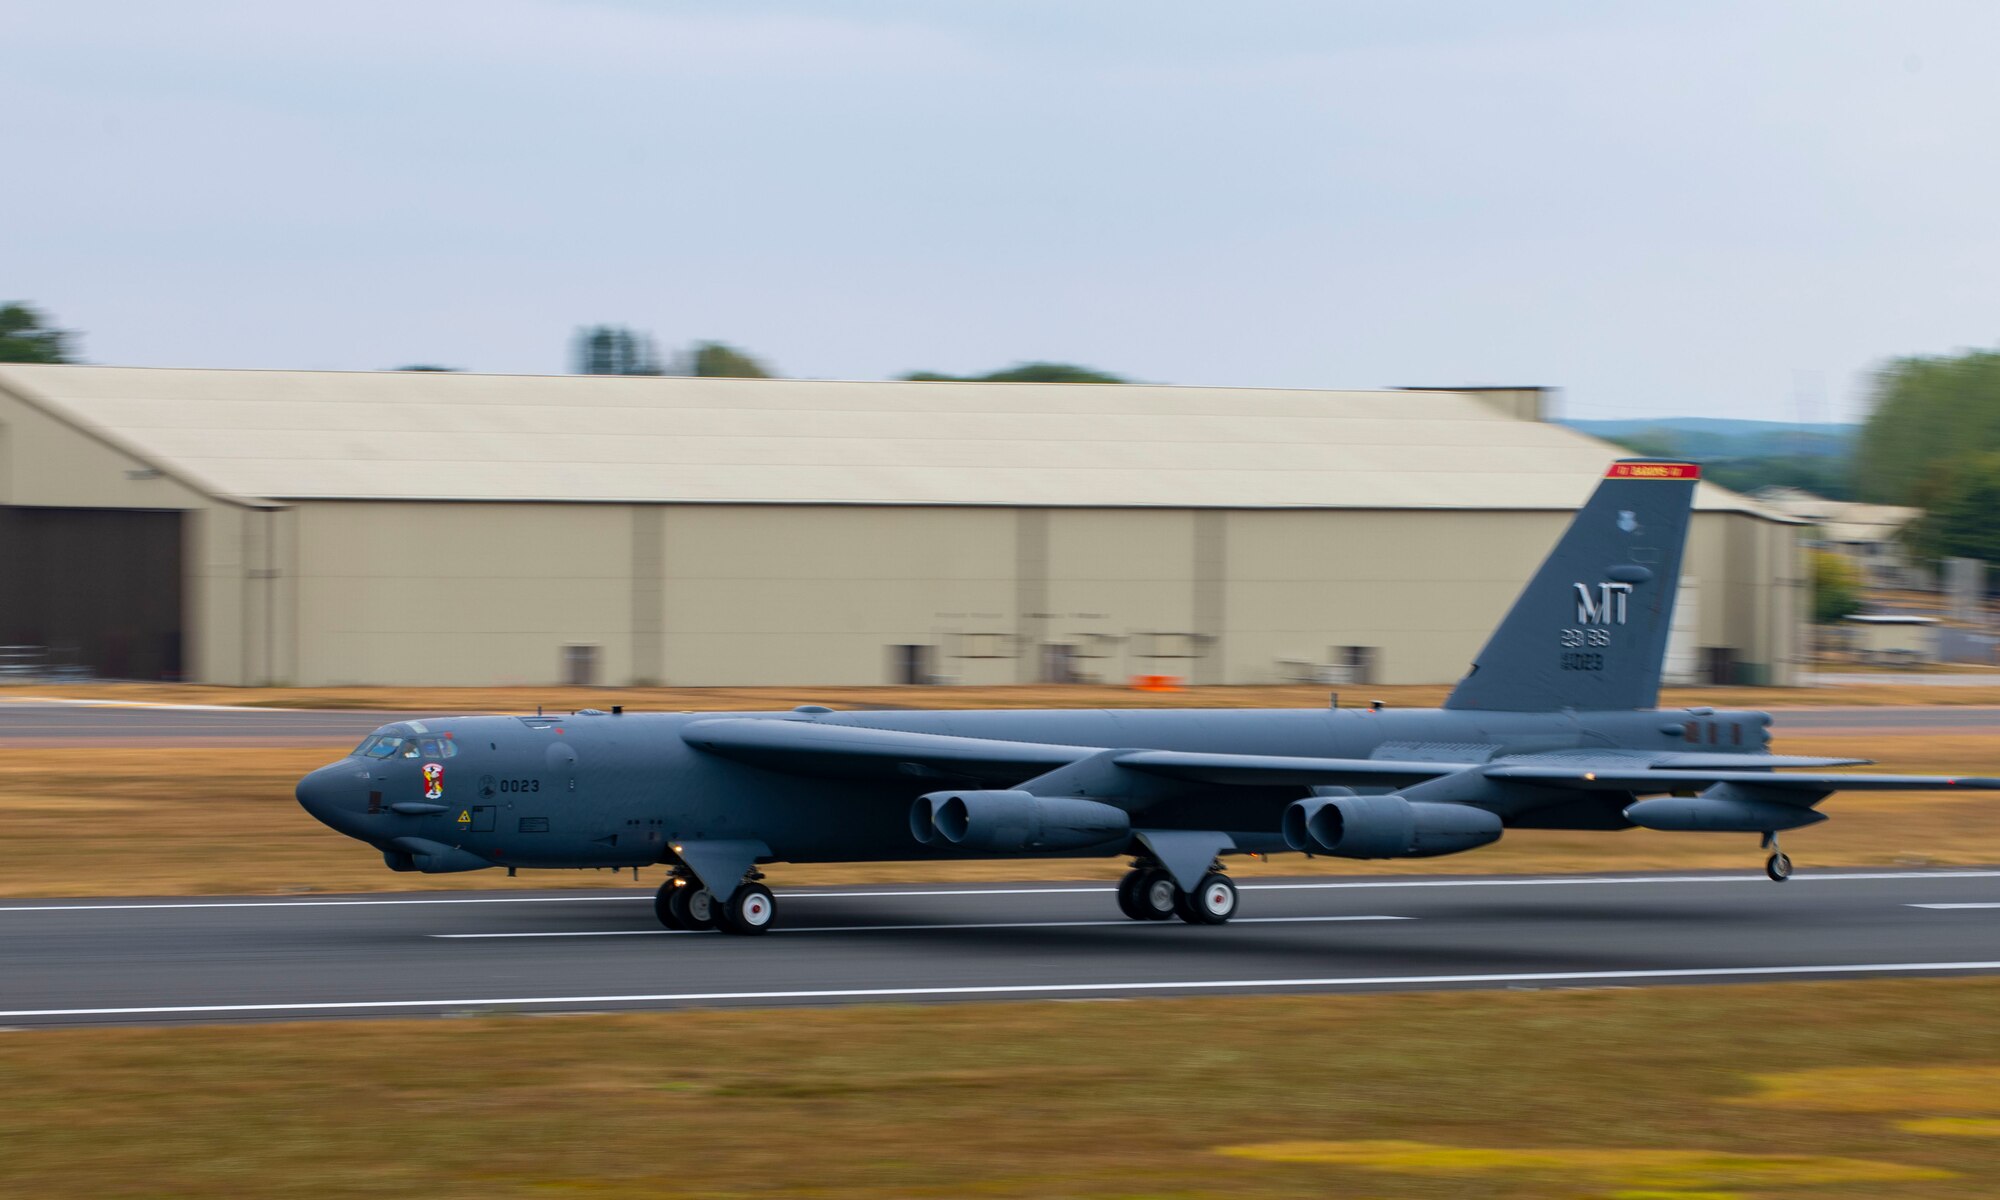 A U.S. Air Force B-52 Stratofortress aircraft, assigned to the 23rd Expeditionary Bomb Squadron, lands on RAF Fairford